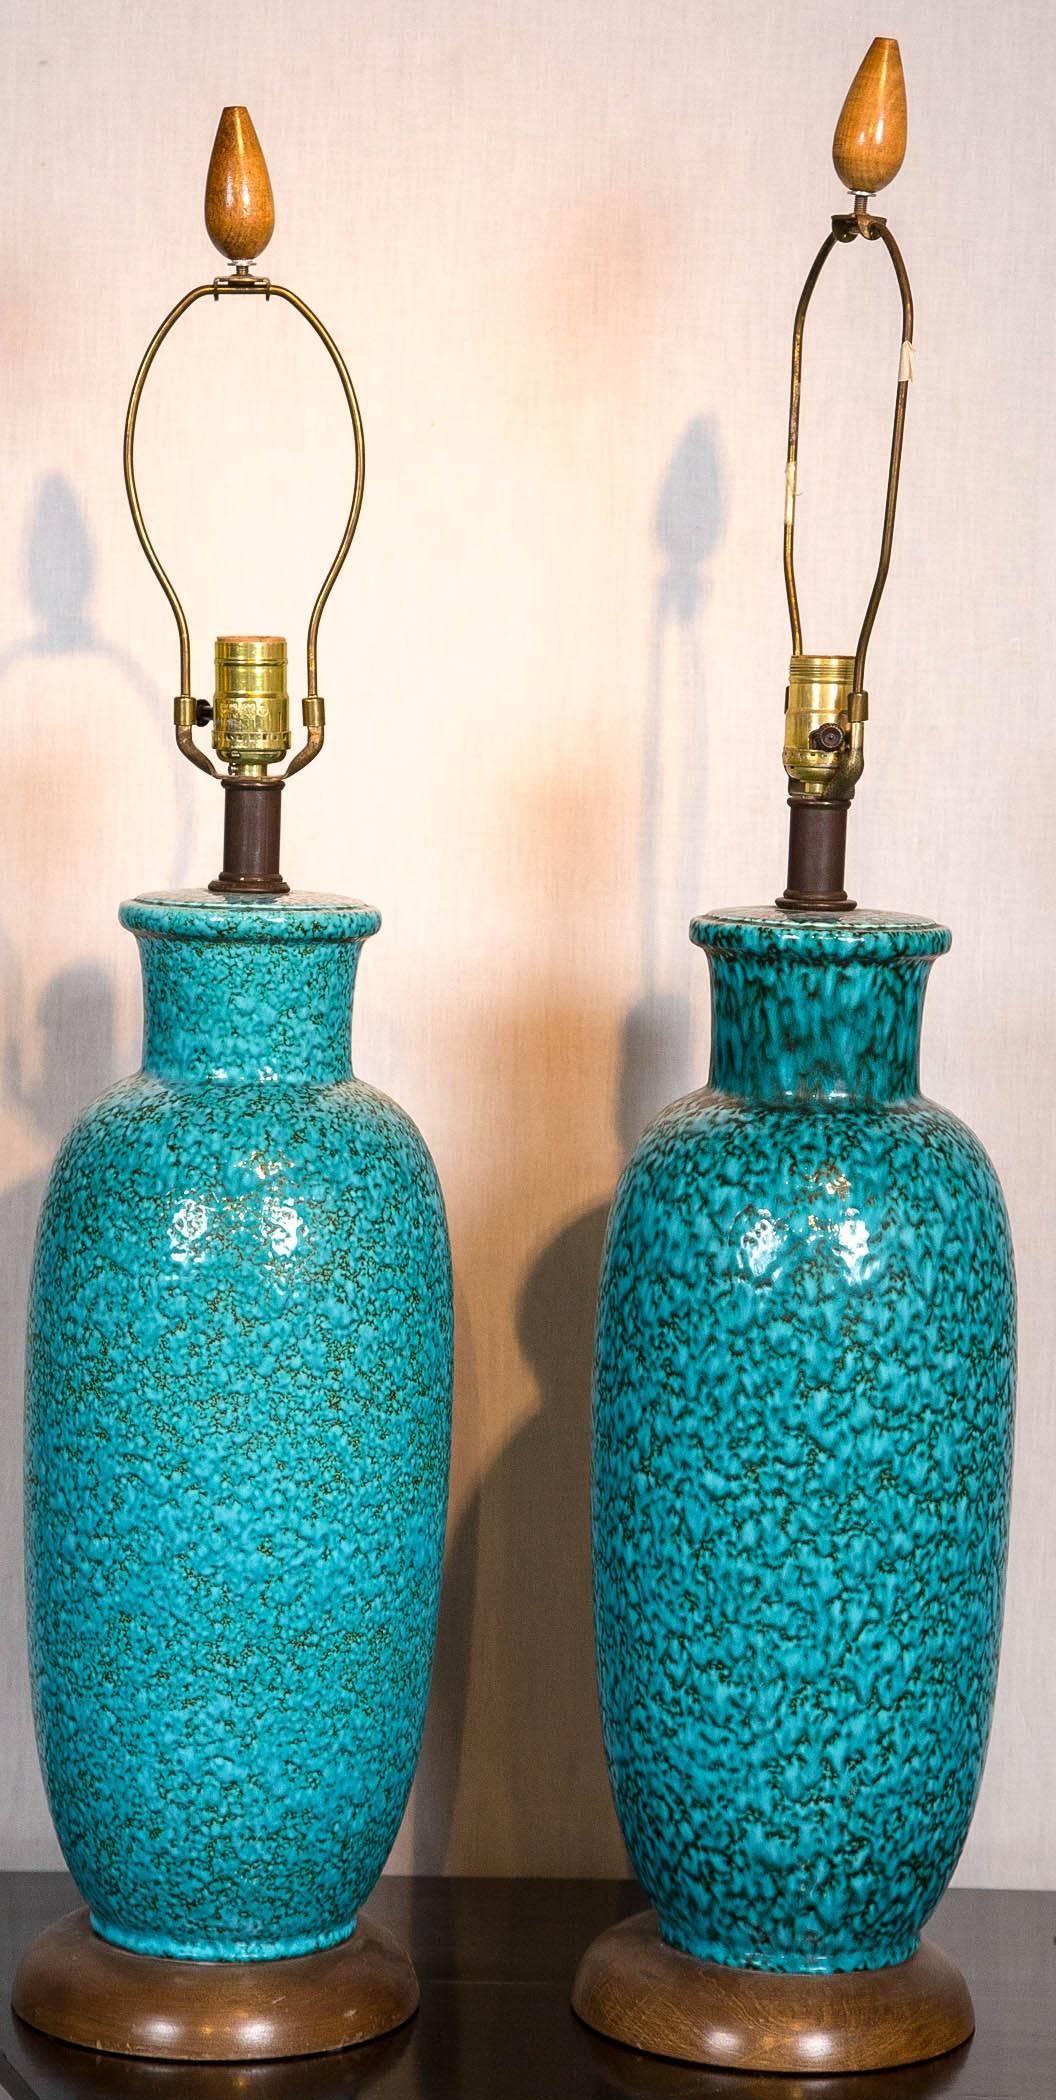 Nice pair of Italian ceramic mottled turquoise lamps, circa 1960s possibly by Gambone.